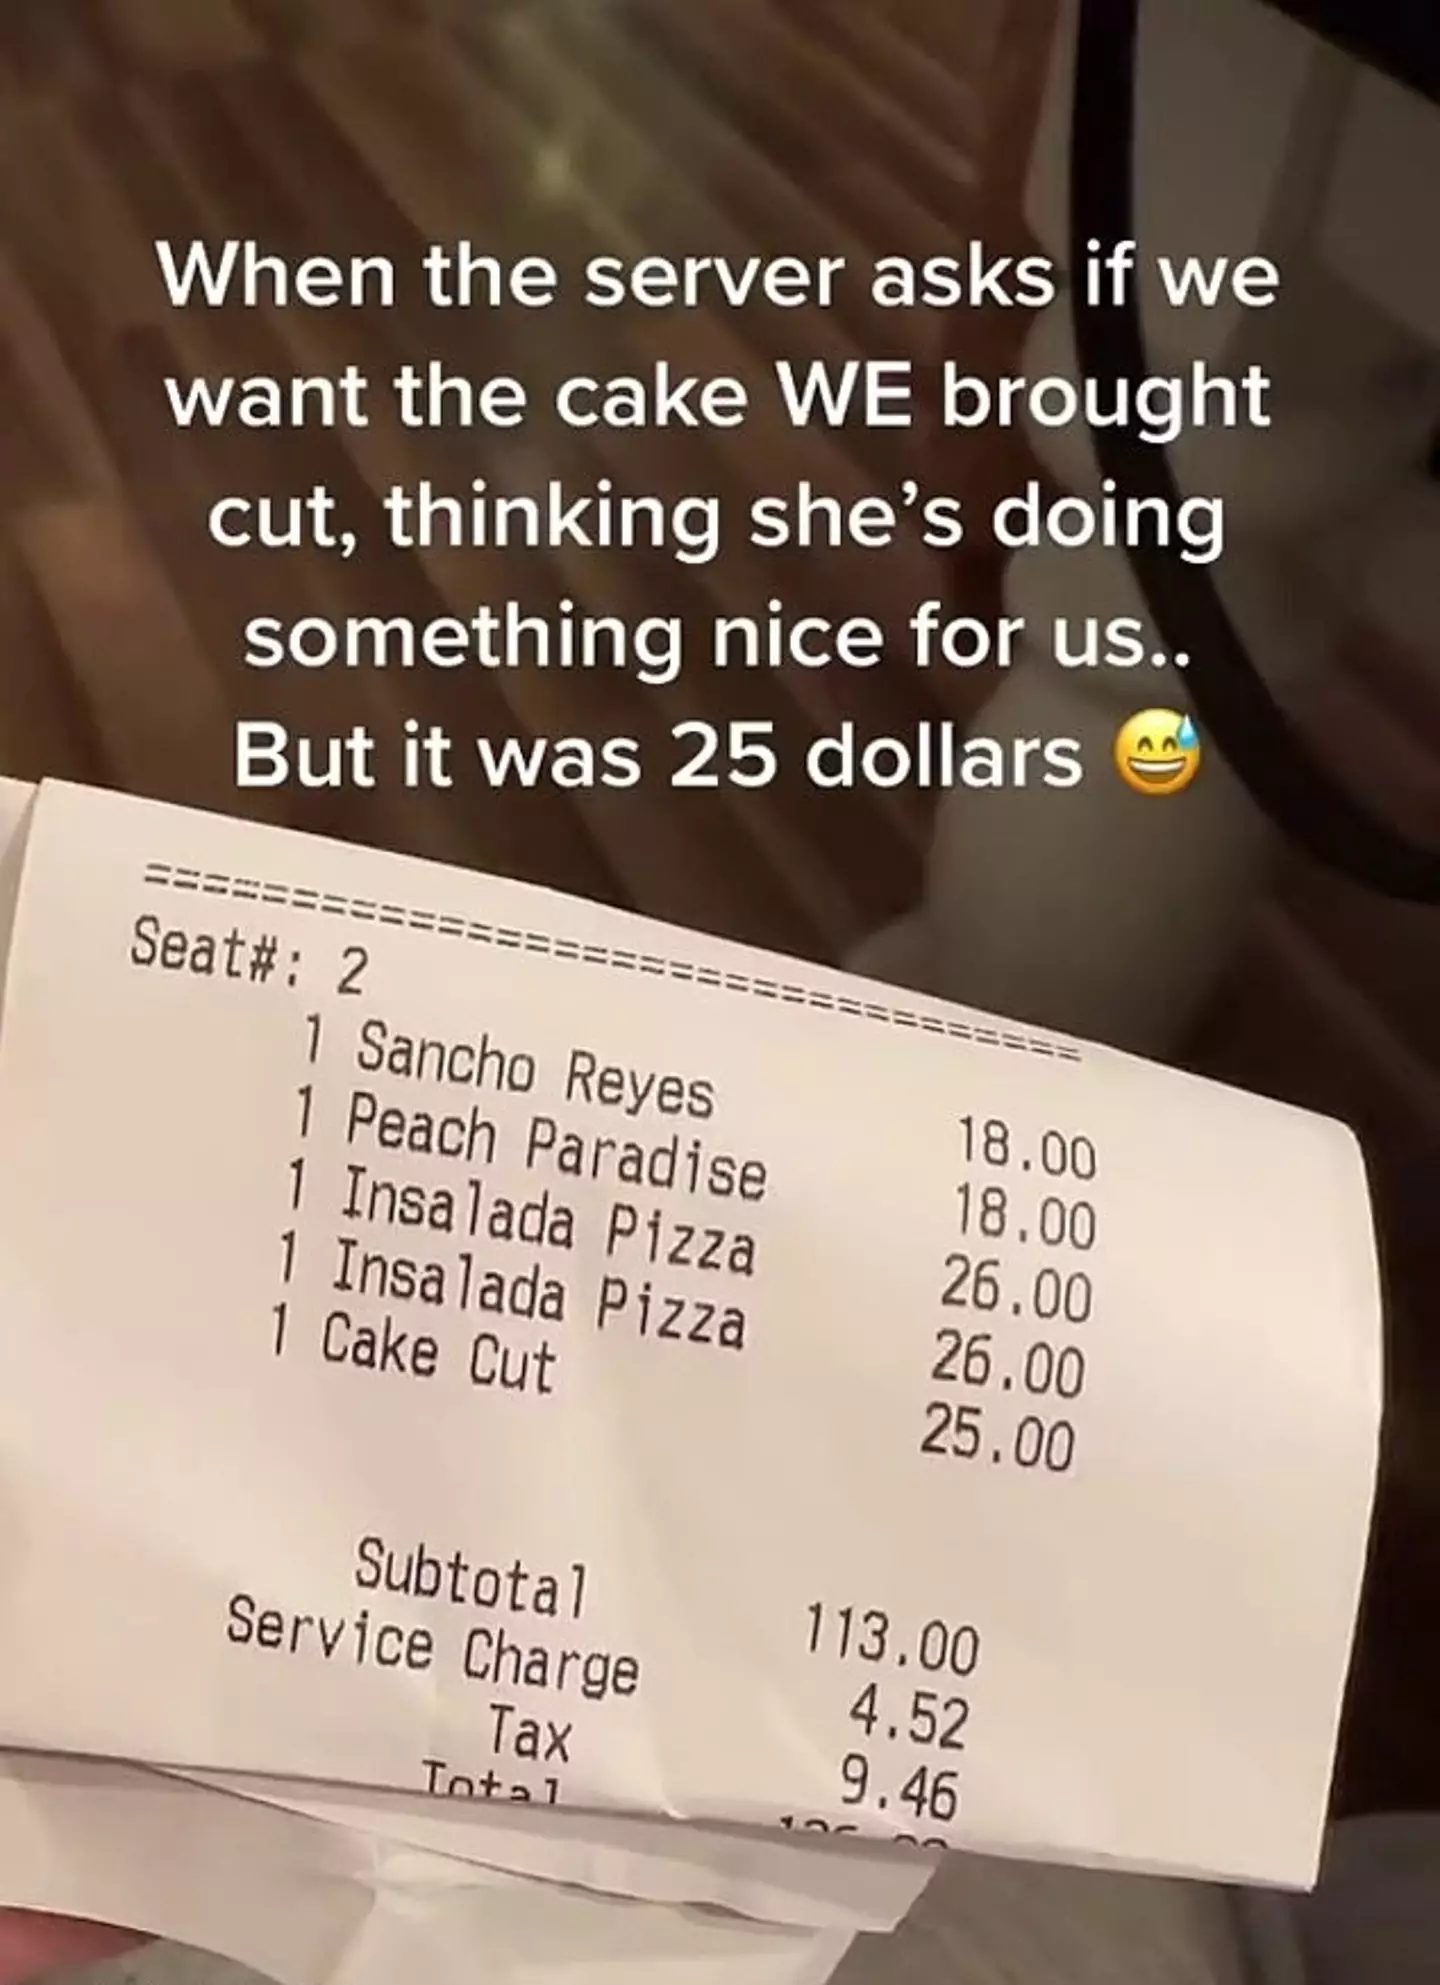 A woman's birthday celebrations were cut short after the restaurant charged her with a ‘ridiculous’ hidden fee. (TikTok/@vivala_blondiiie)